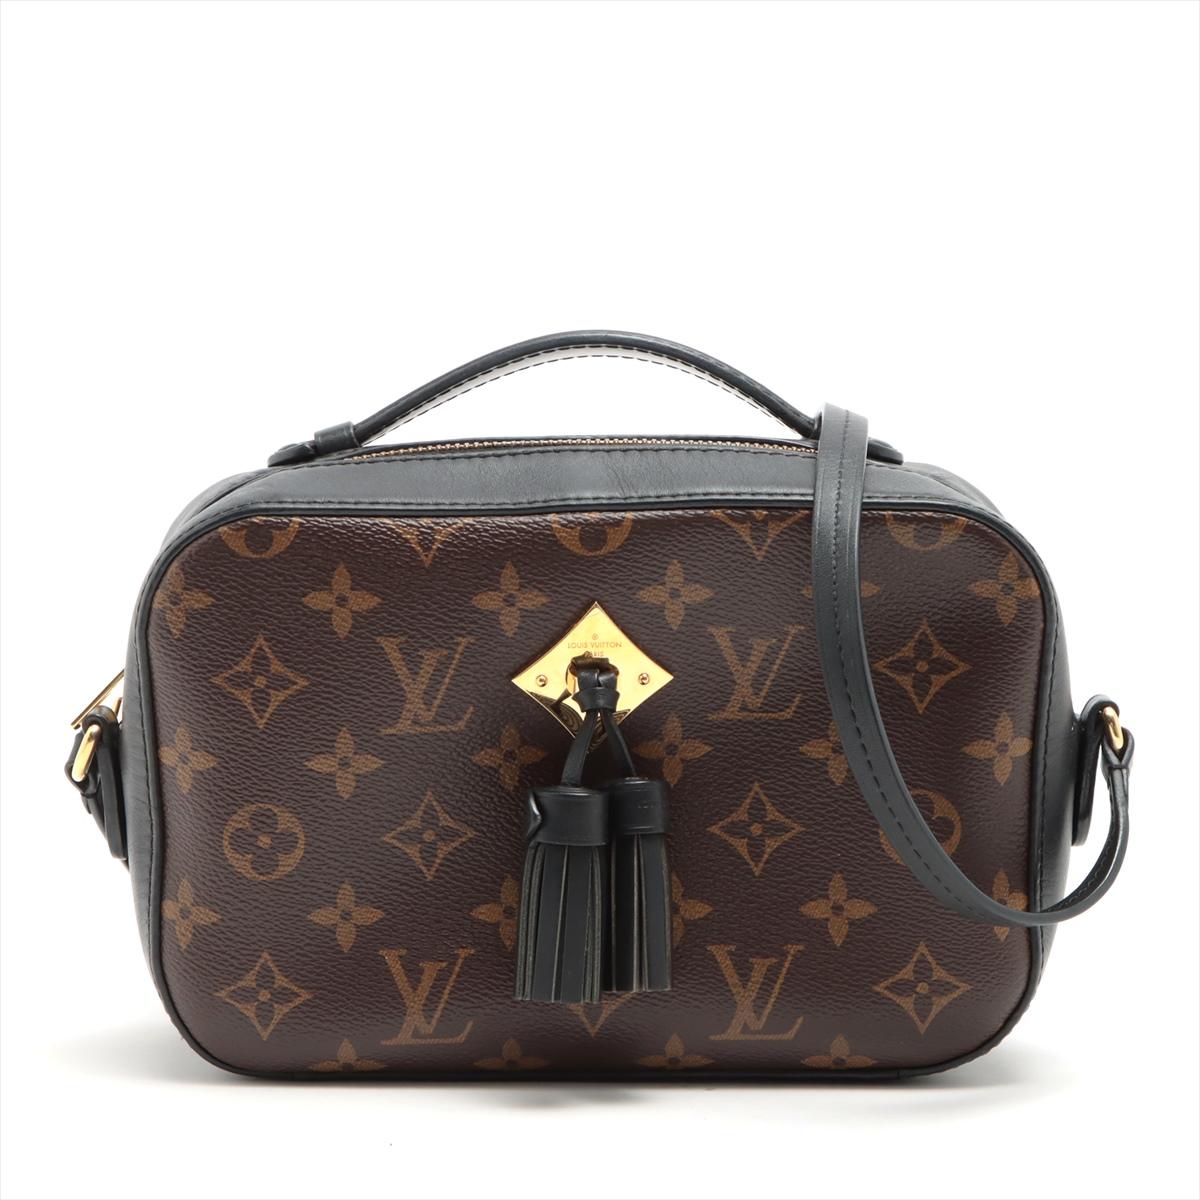 The Louis Vuitton Monogram Saintonge is a stylish and compact crossbody bag that showcases the brand's iconic Monogram canvas, reflecting a timeless and sophisticated aesthetic. Meticulously crafted, the bag features the instantly recognizable LV